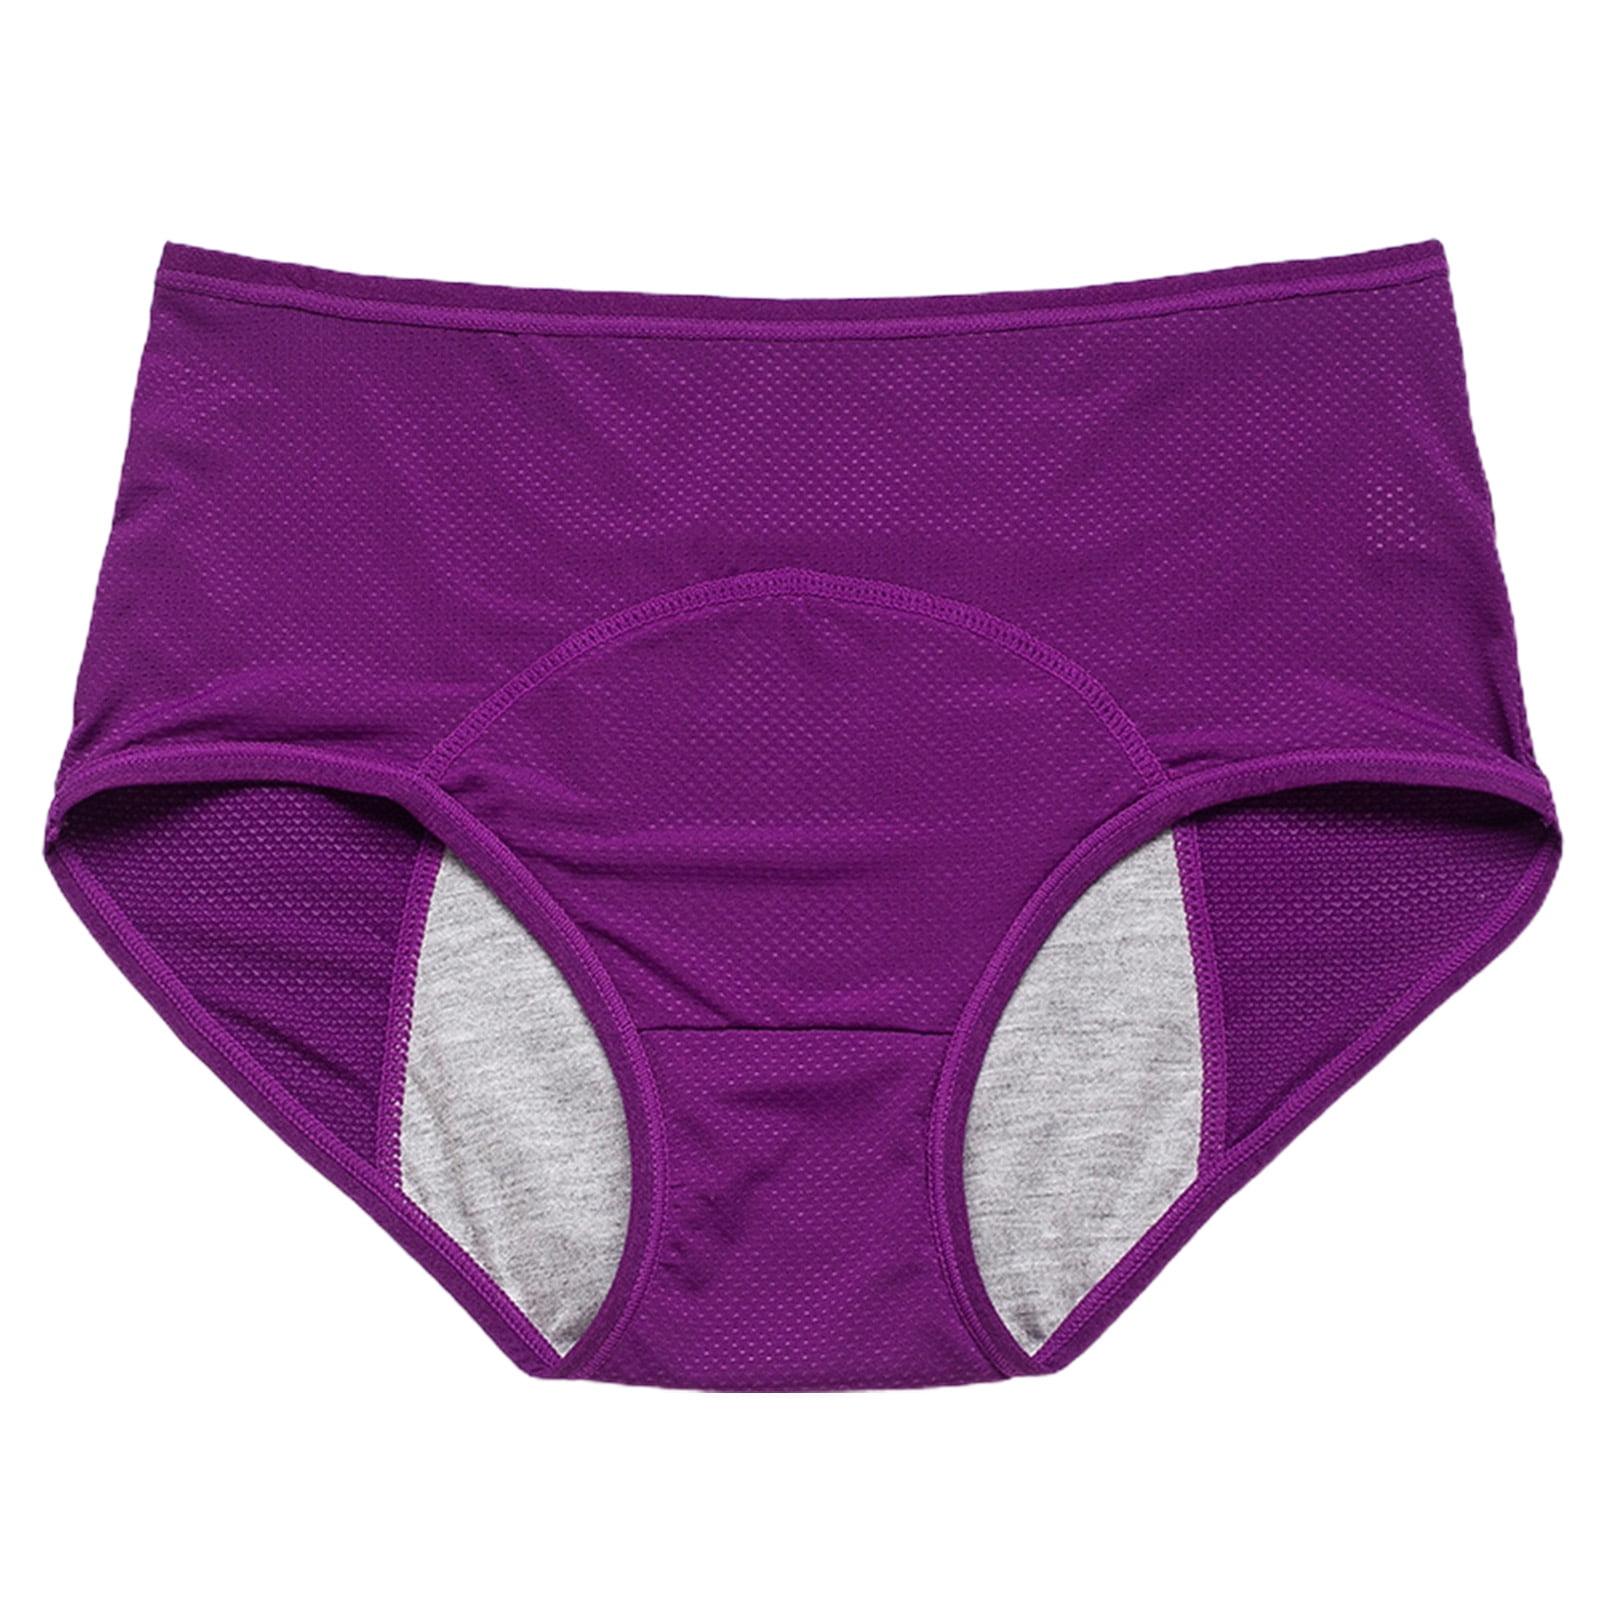 Protection High Menstruation Extra Underwear Rise Mid Rise Leak-proof Purple,XL Panties,Crystal Stretchy Menstrual Briefs Breathable Women